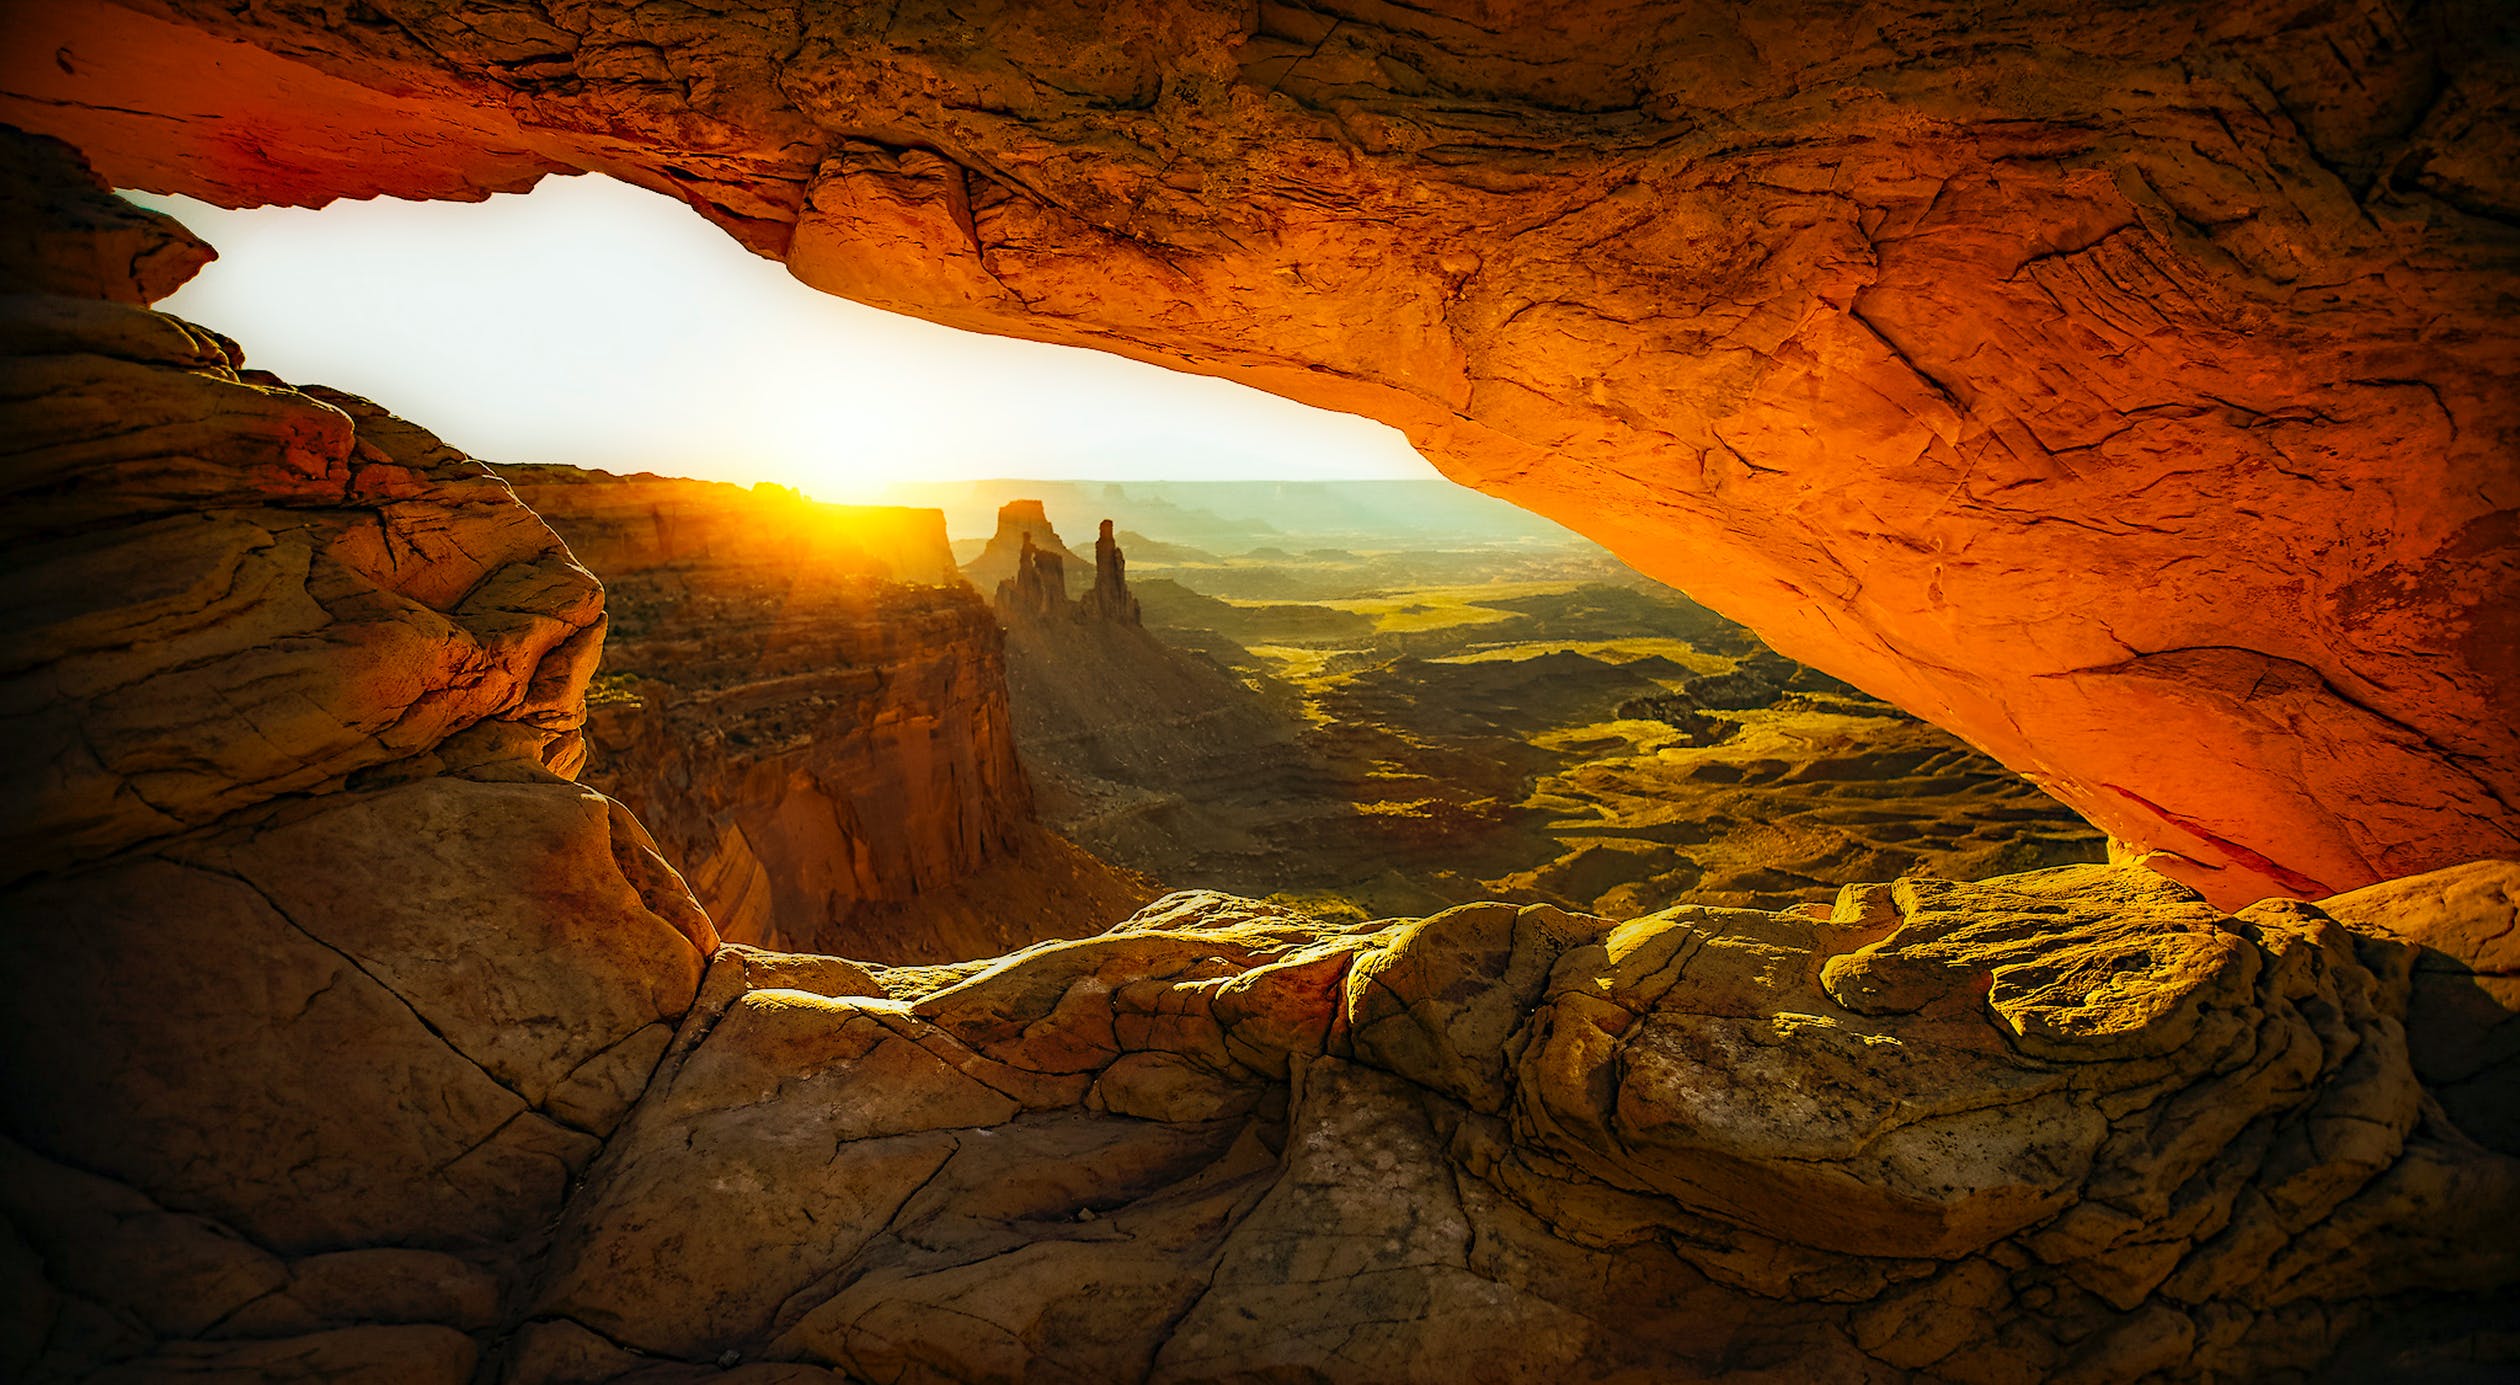 Background image of a cave with the sun in the horizon